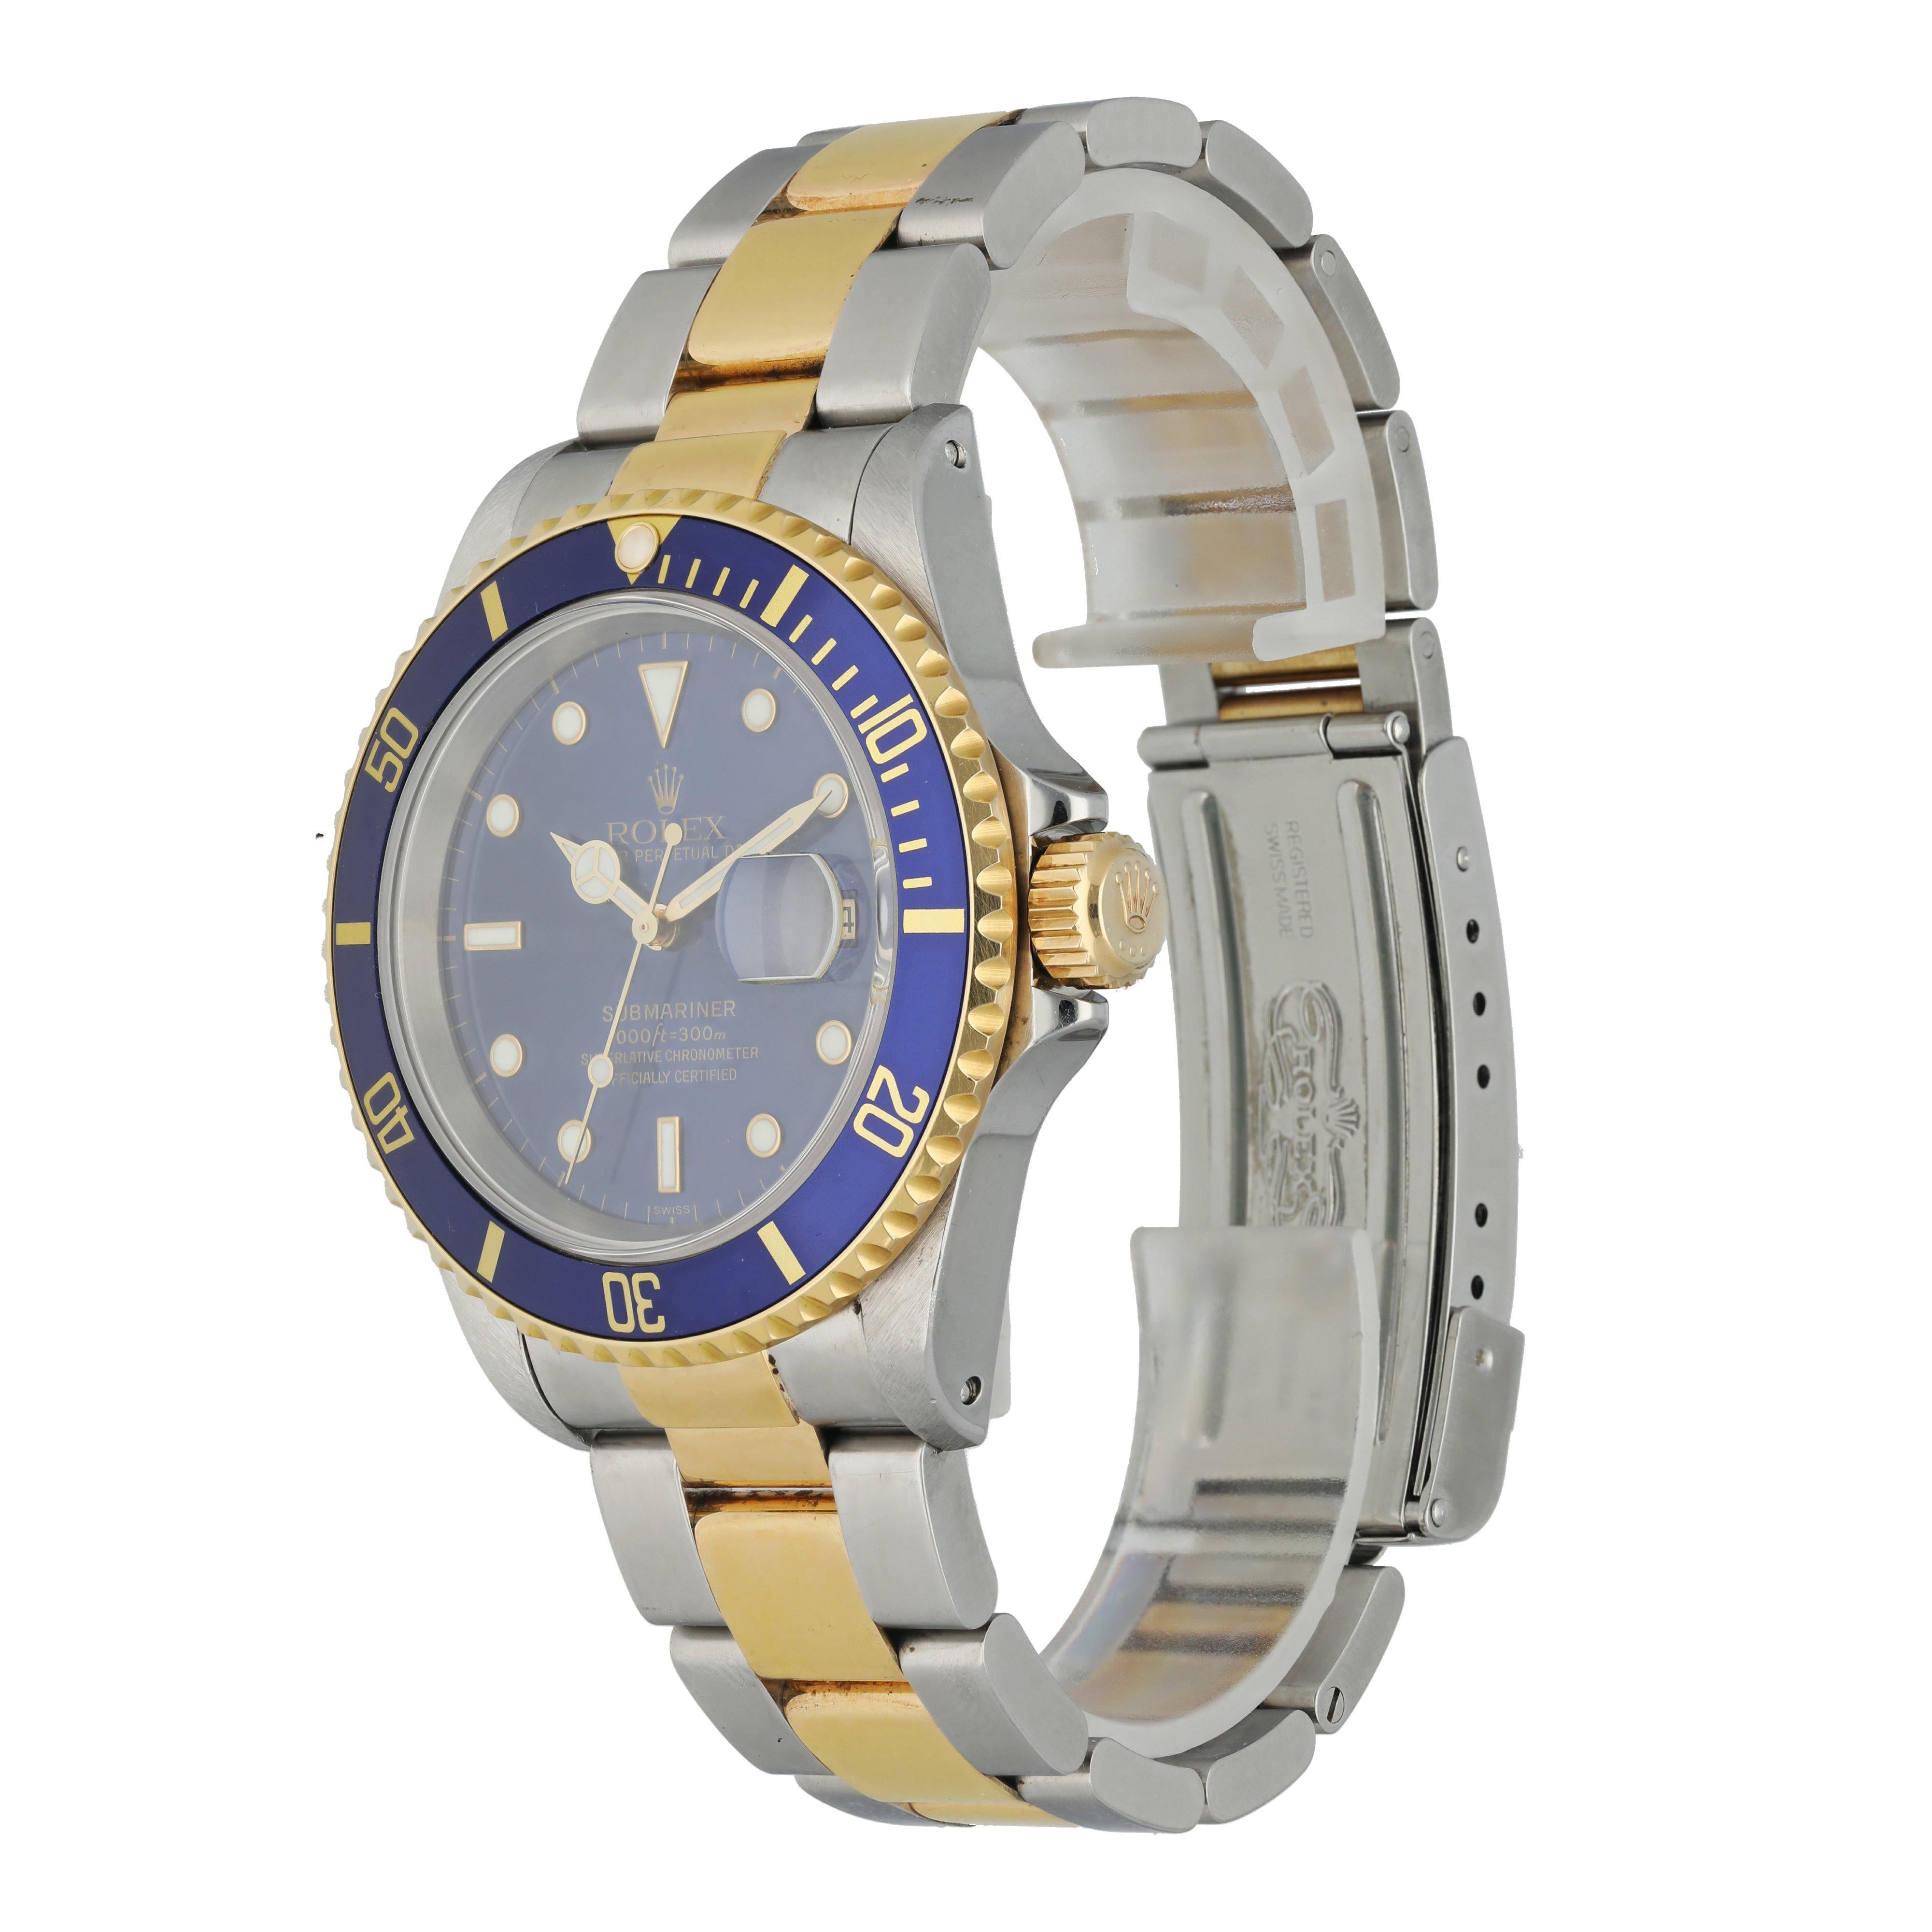 Rolex Submariner 16613 Mens Watch. 
40mm Stainless Steel case. 
18k yellow gold bezel with blue insert.
Blue dial with luminous gold hands and luminous dot hour markers. 
Date display at the 3 o'clock position. 
Oyster two-tone Bracelet with